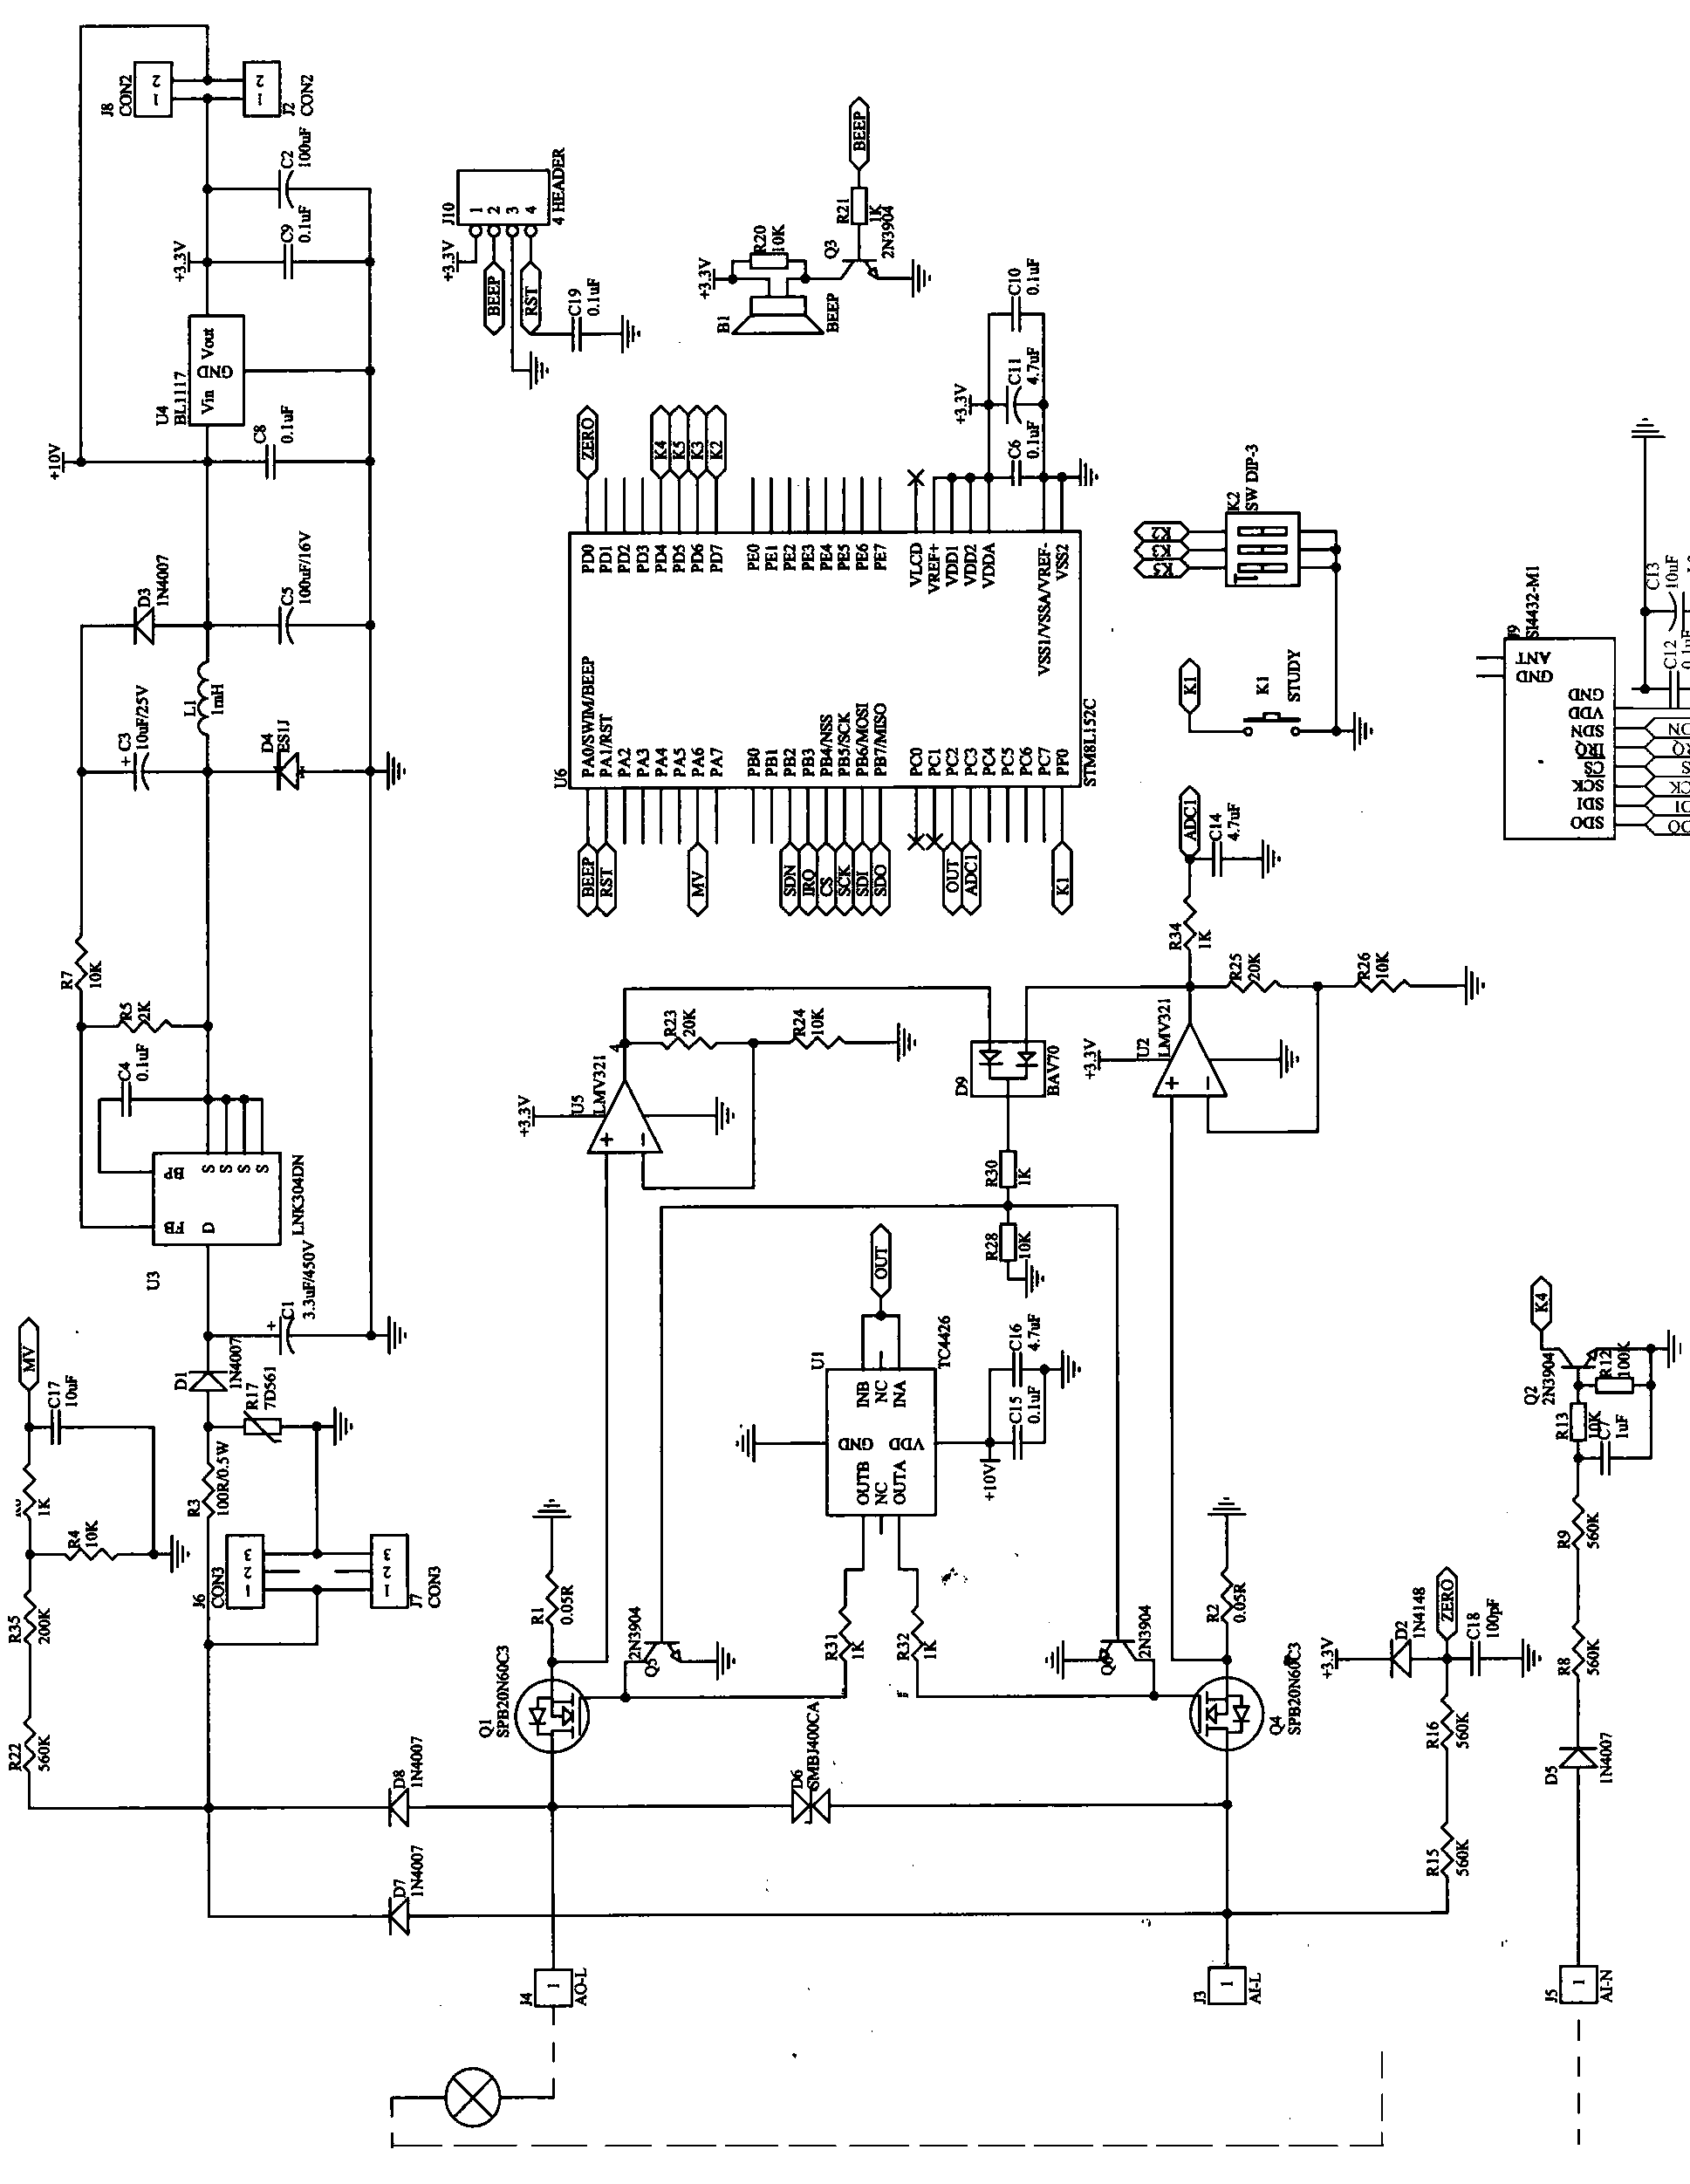 Single-wire-system radio-frequency light modulator based on microcontroller